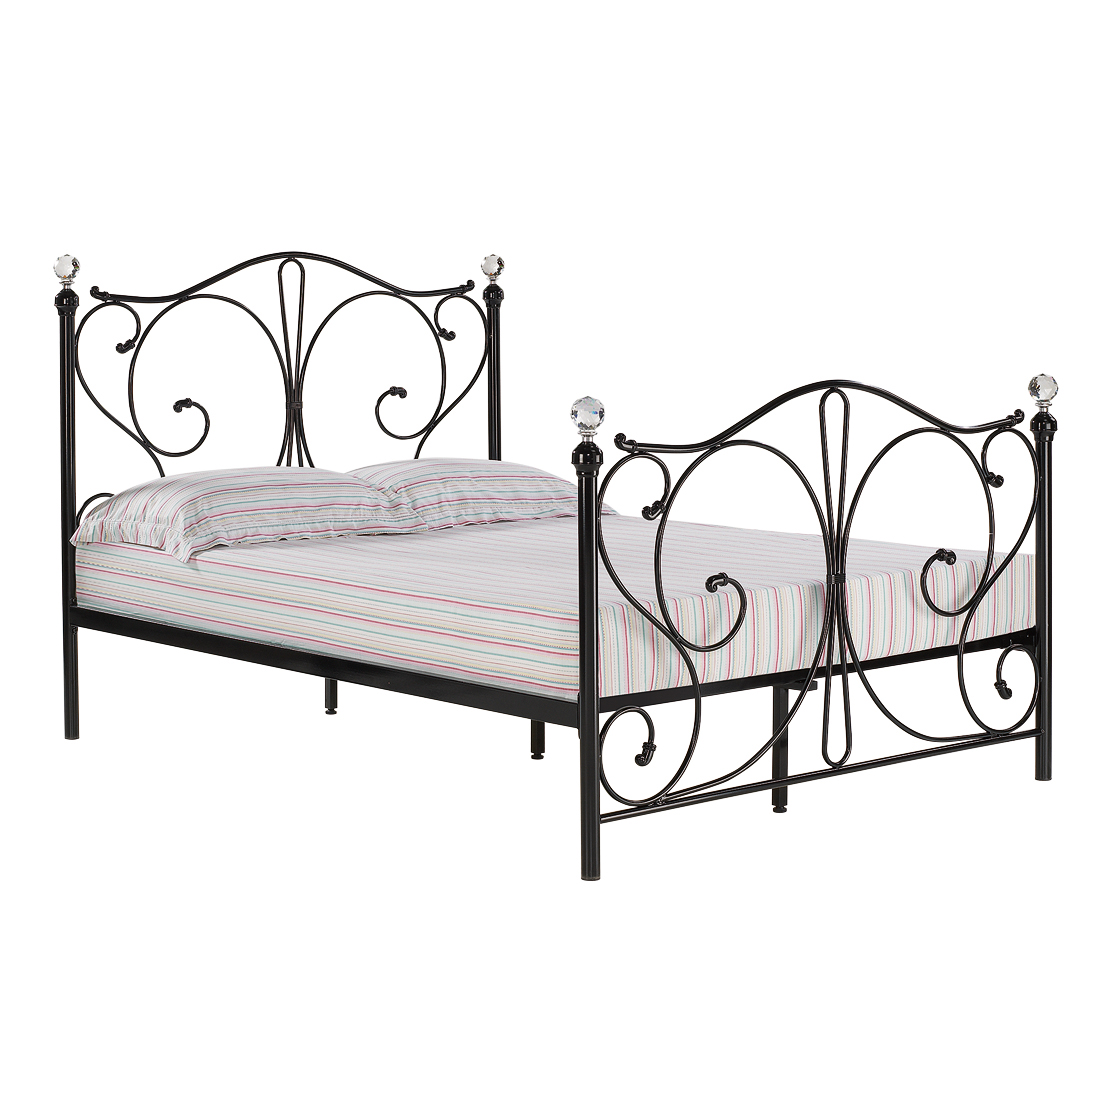 Fountain 4.6 Double Bed Black